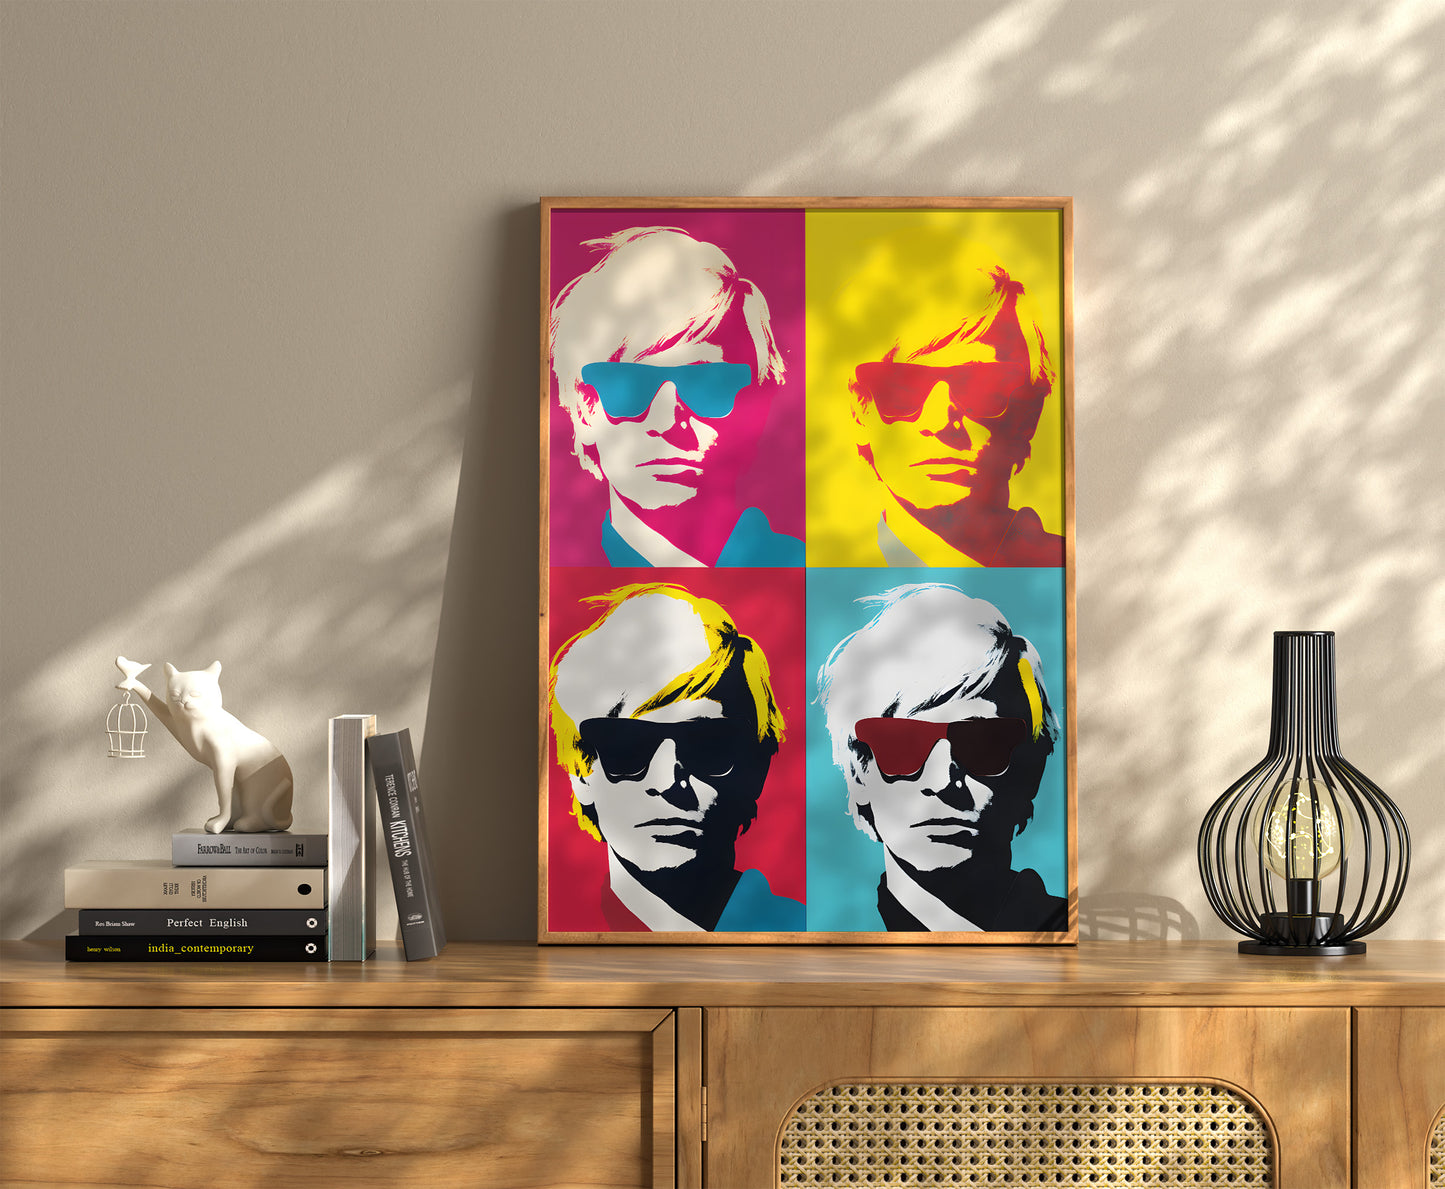 Pop art style portraits on a wall with books and a decorative vase on a sideboard.